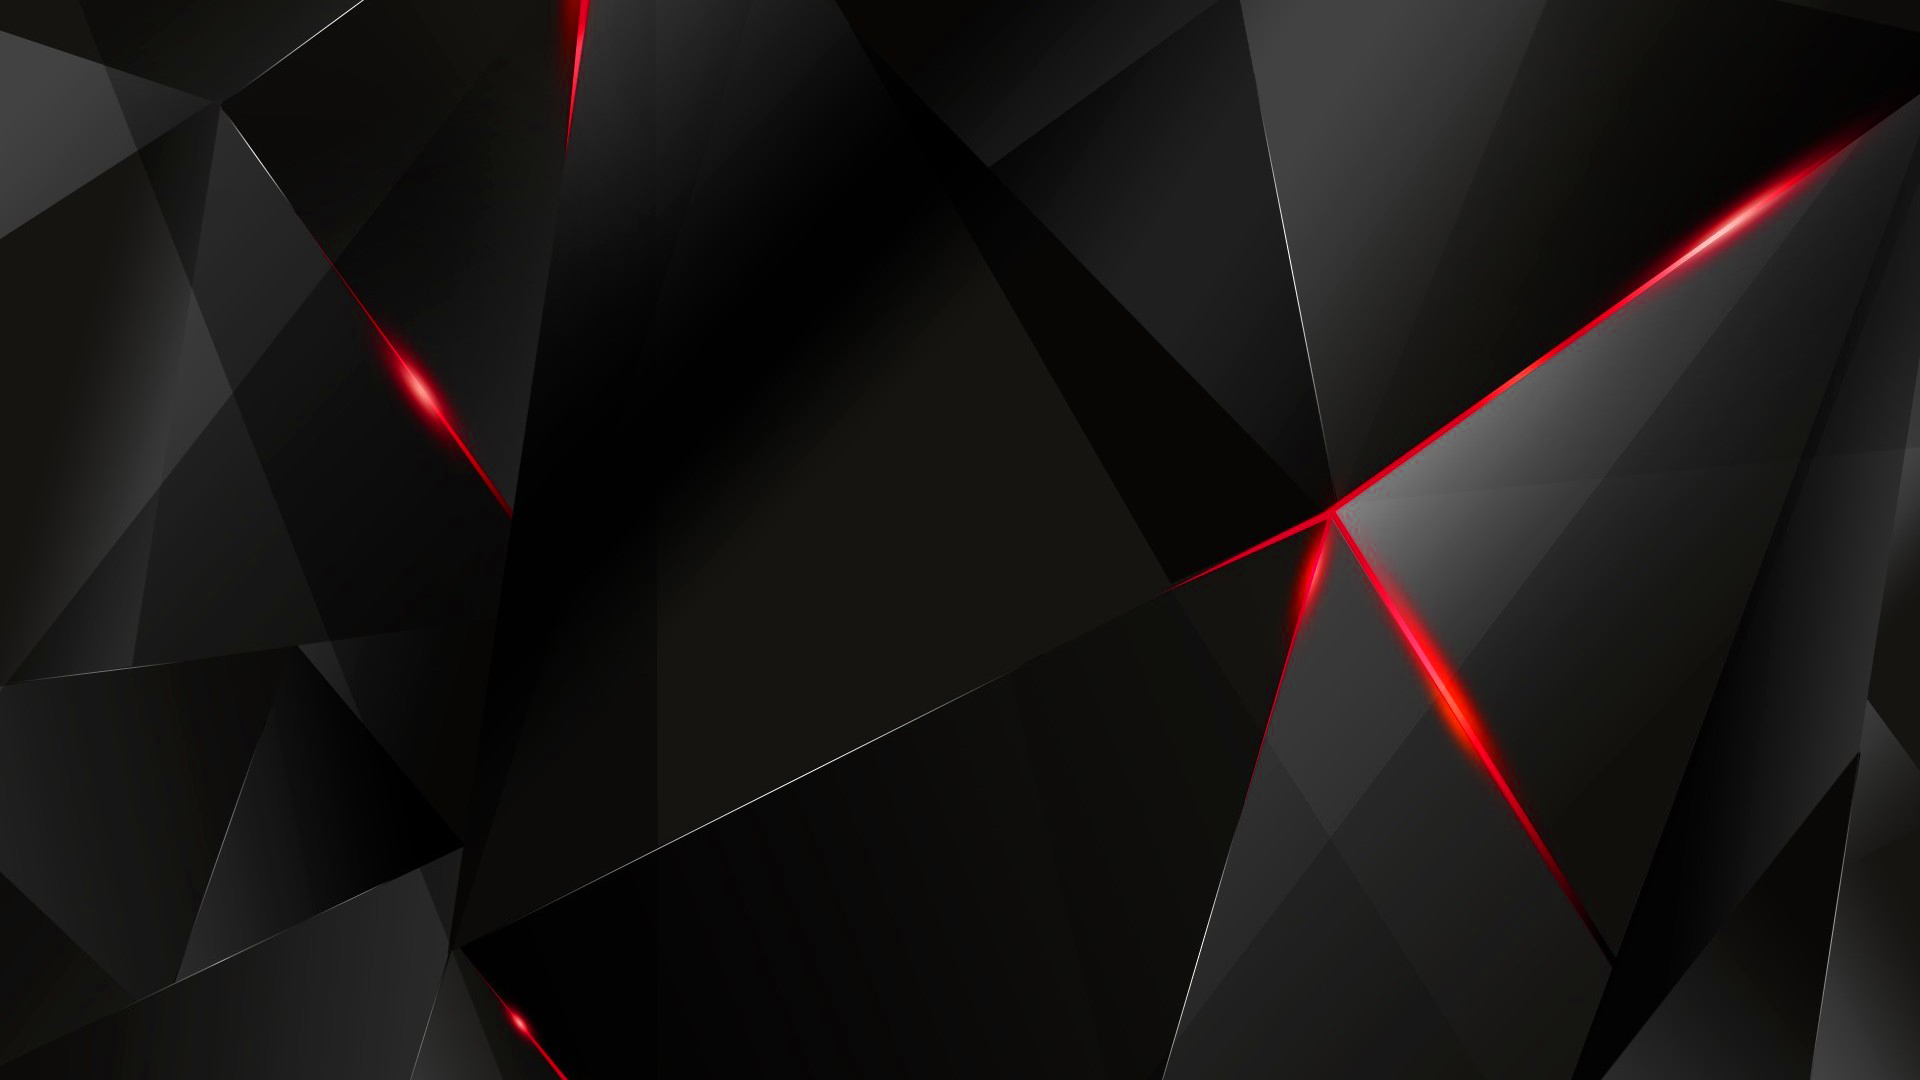 Wallpapers - Red Abstract Polygons (Black BG) (RE) by kaminohunter on  DeviantArt